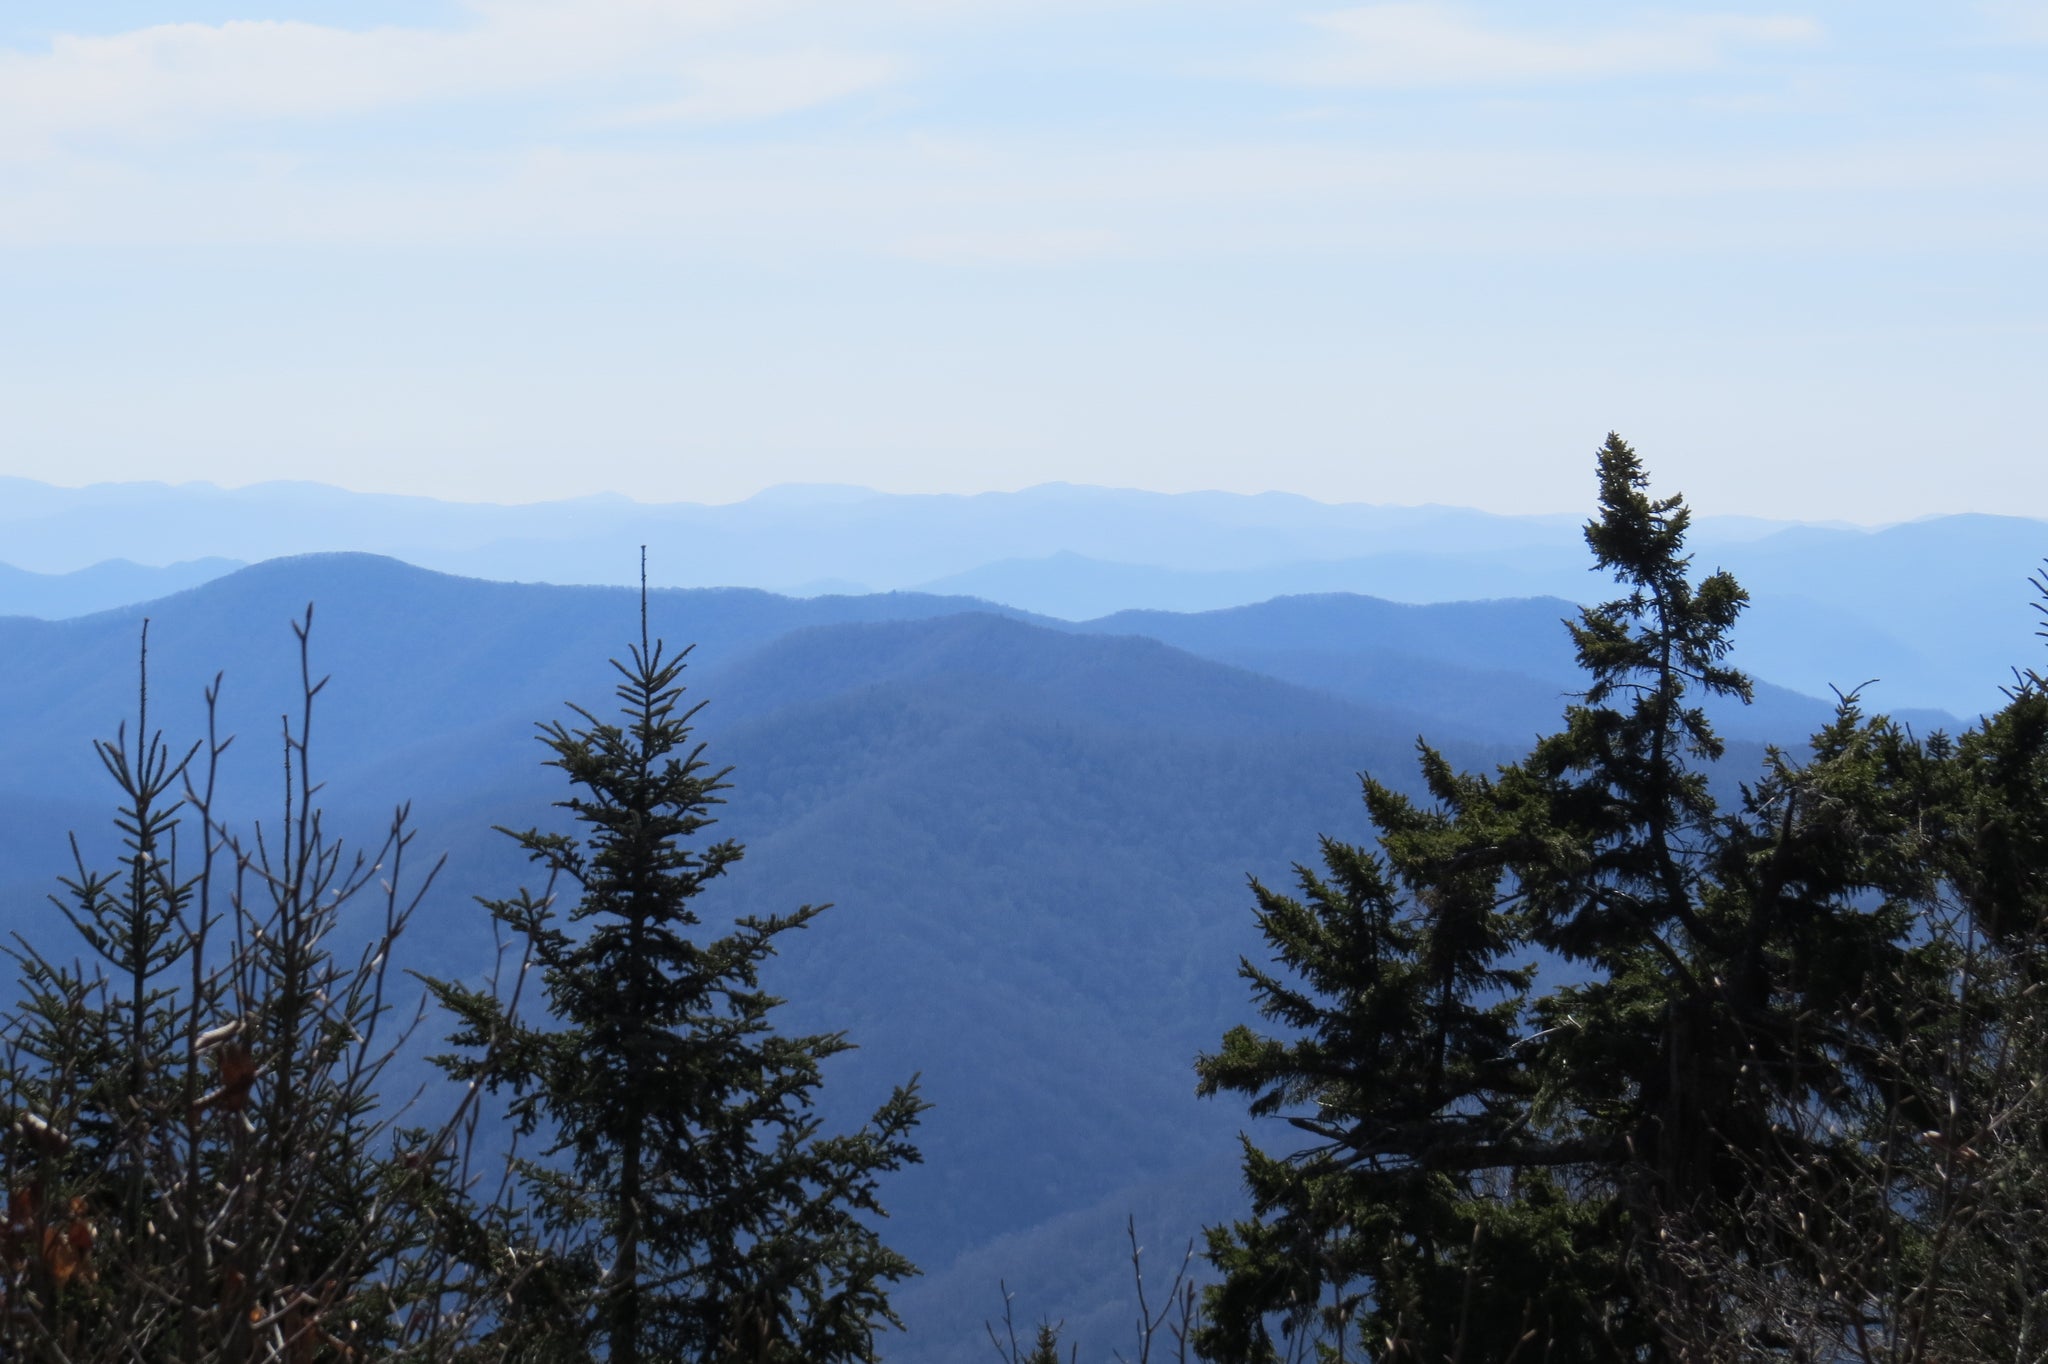 Illustrated Guide to Great Smoky Mountains National Park: The Gap Is Where It's At (Part 3)